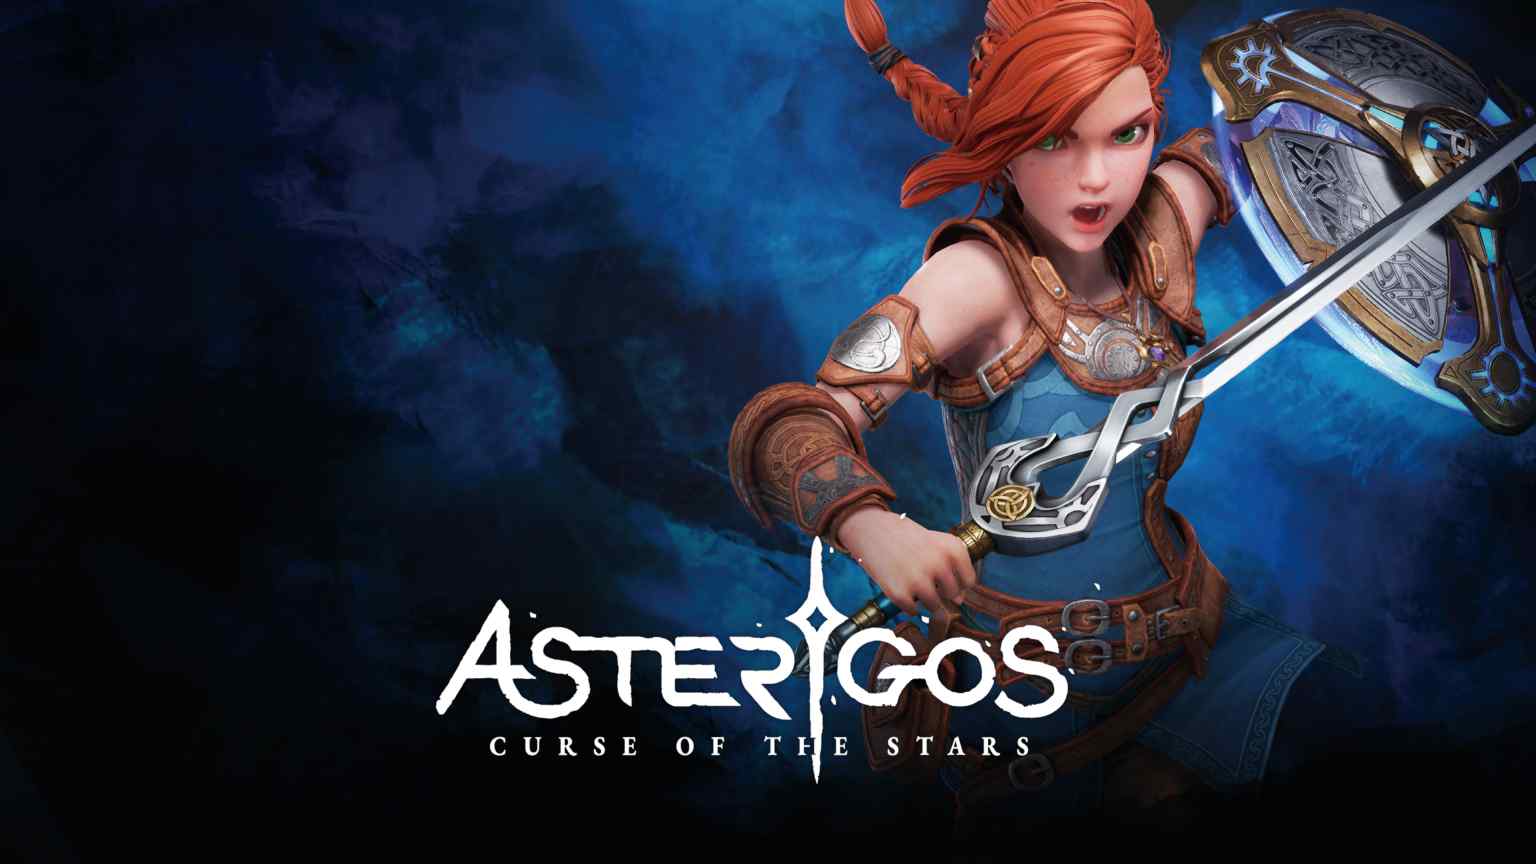 Asterigos Curse of the Stars Title Card